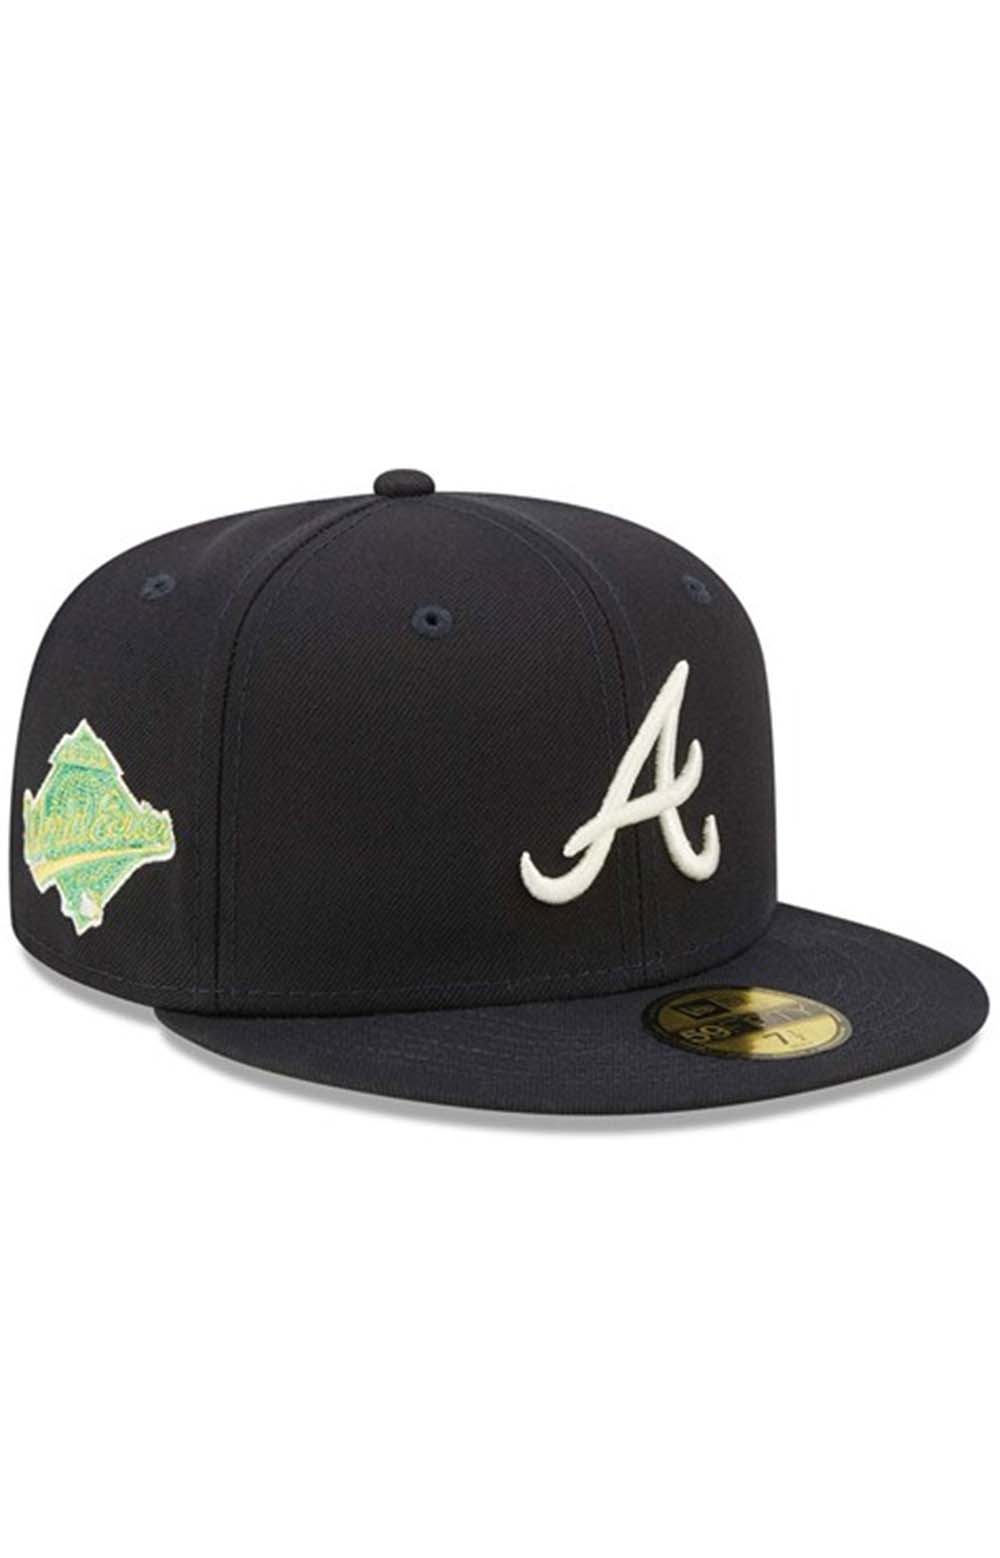 Atlanta Braves Citrus Pop 59FIFTY Fitted Hat